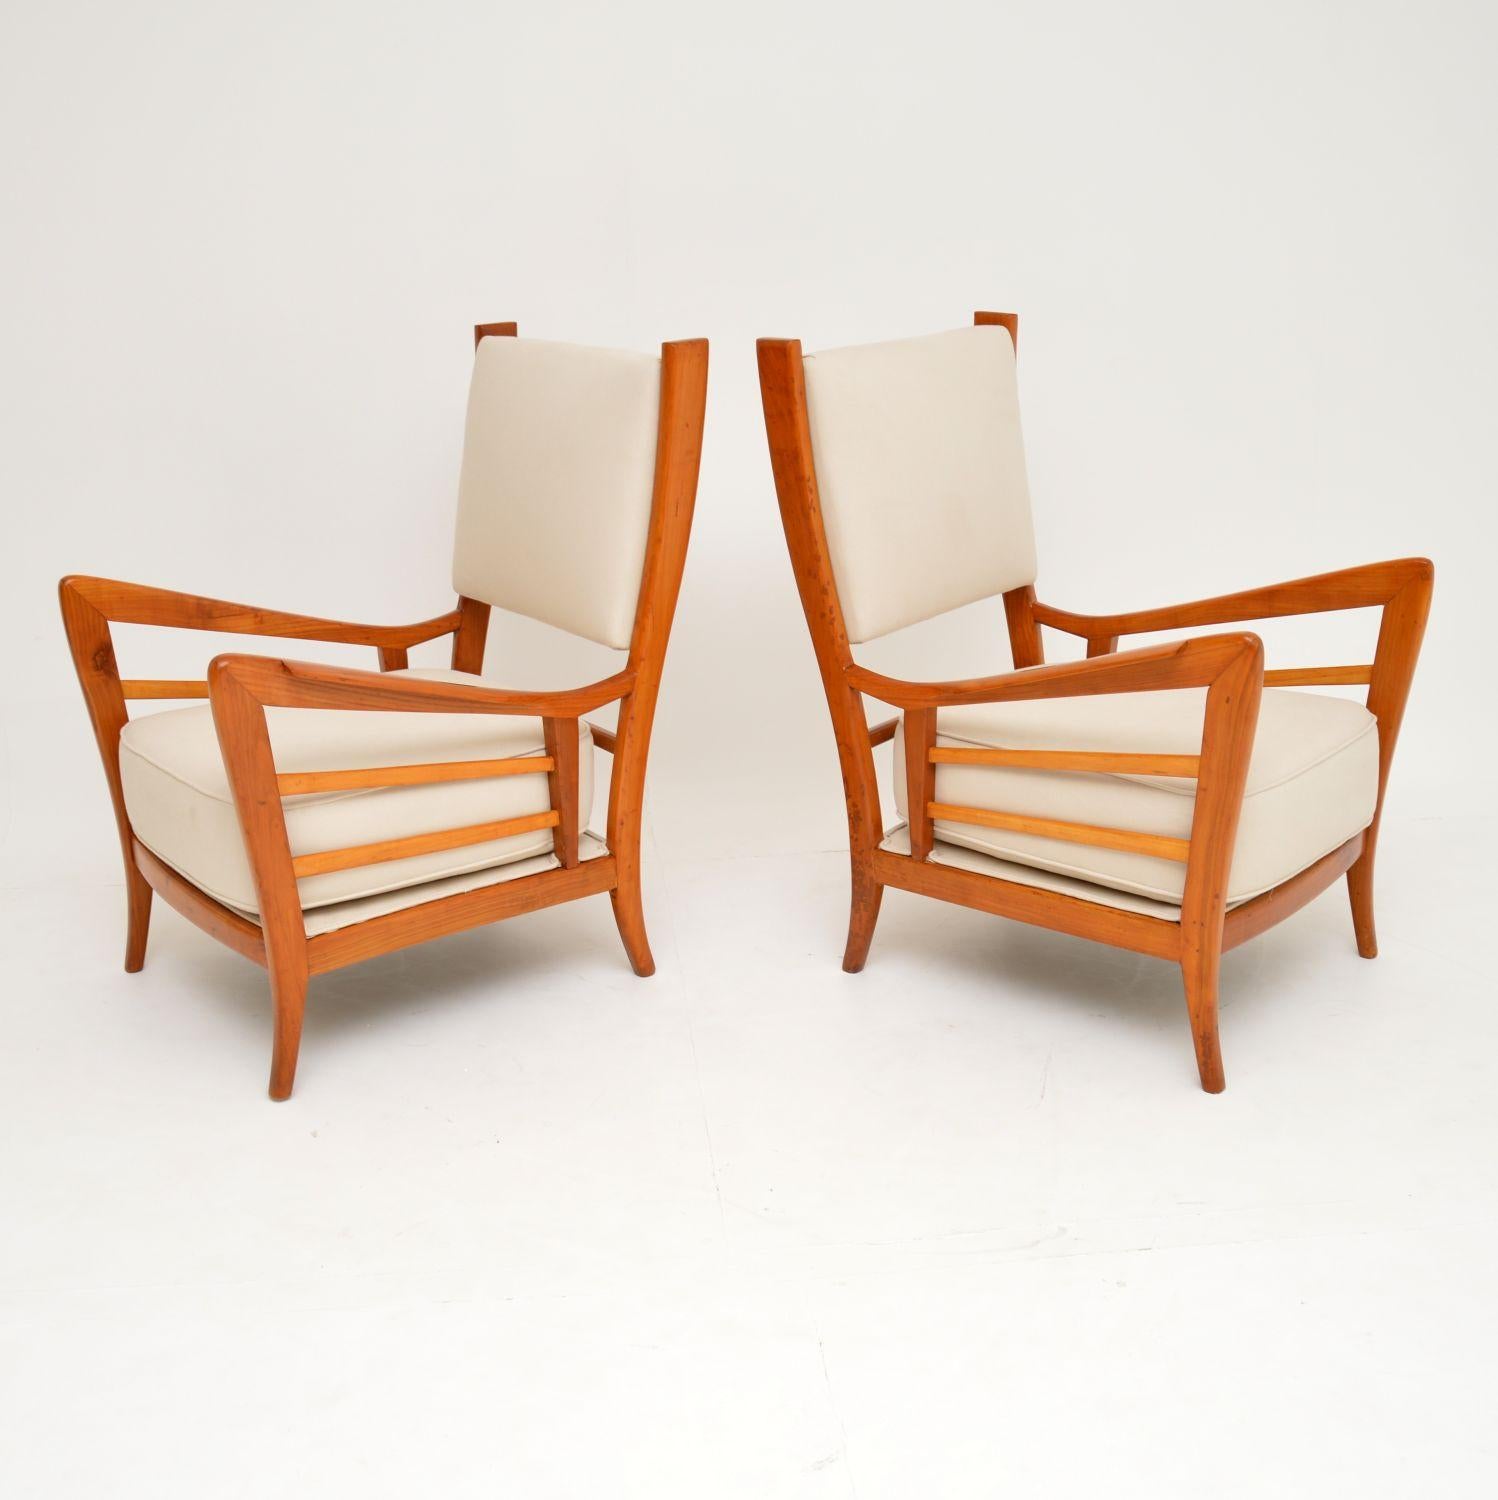 An absolutely stunning pair of midcentury Italian armchairs, dating from the 1950s. These are very much in the manner of Gio Ponti, though we are not sure who designed them. They are of super quality and have such a beautiful design. We have had